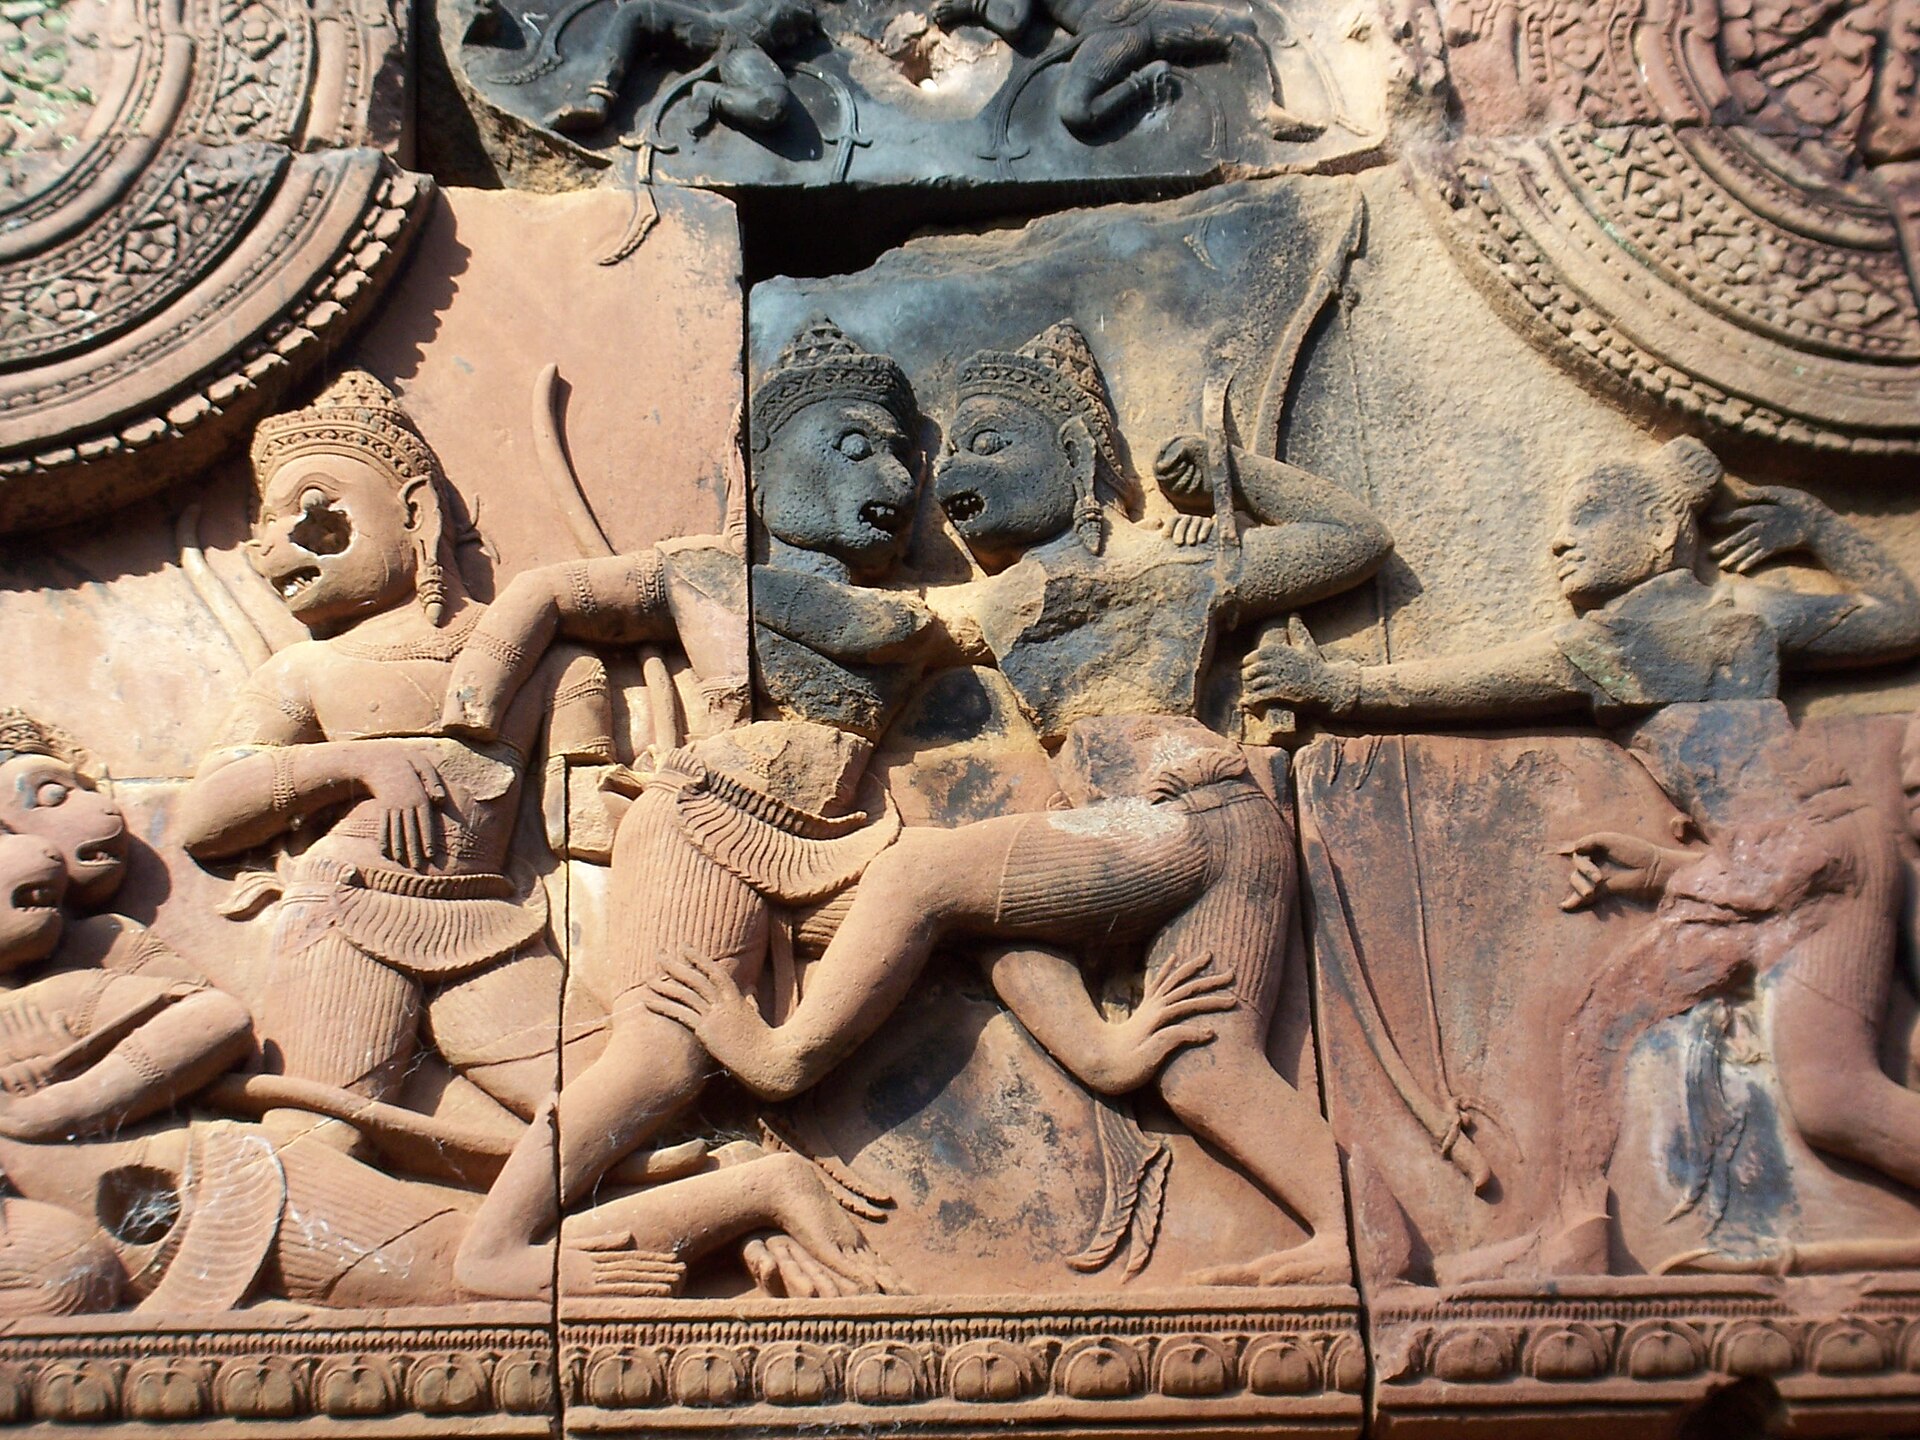 This tympanum from the Khmer temple of Banteay Srei depicts Sugriva fighting with his brother Bali. To the right, Rama is poised to shoot an arrow at Vali.